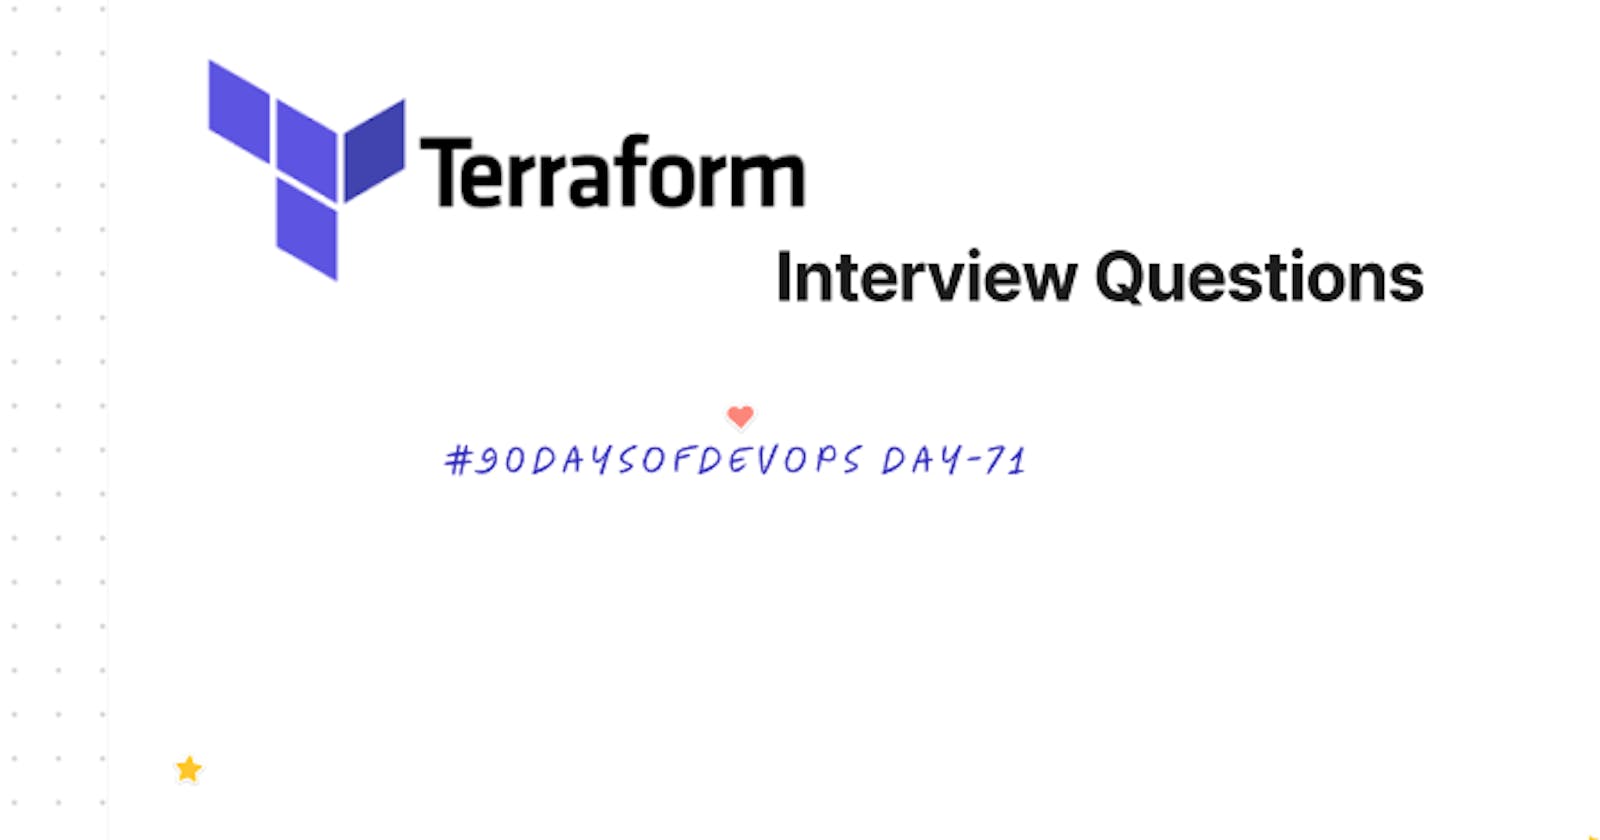 Some Interview Questions & Answers of Terraform